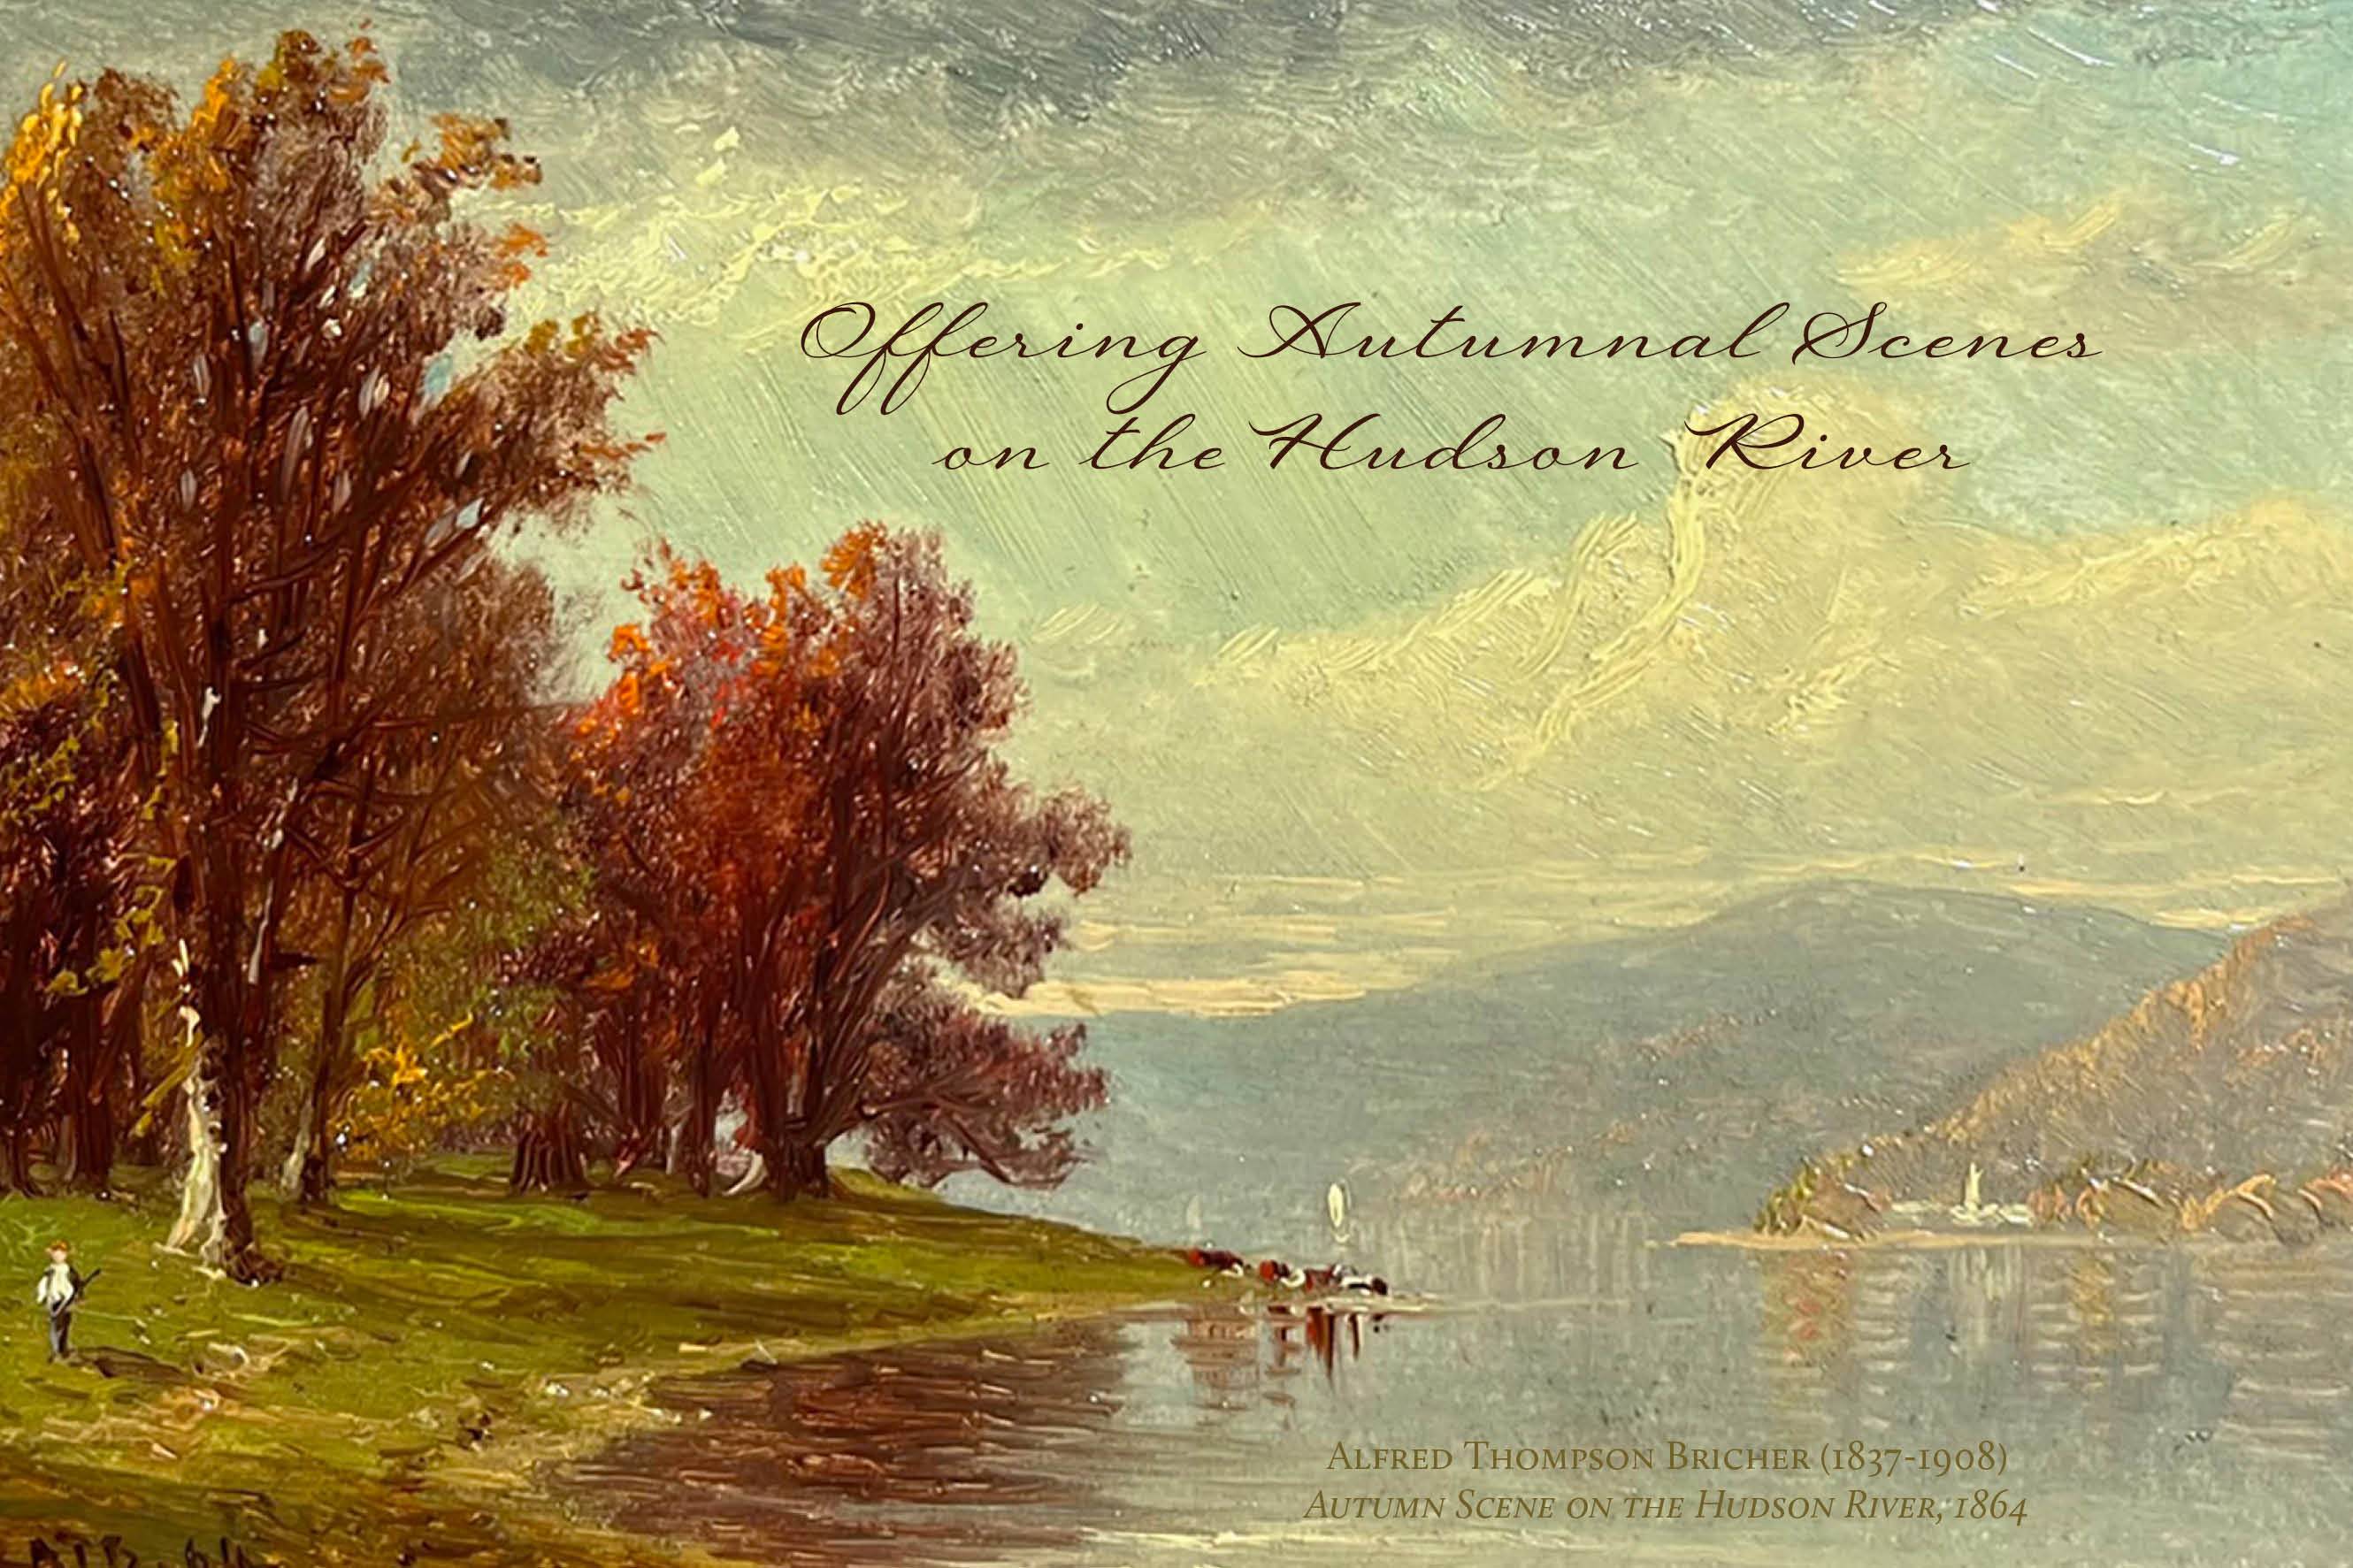 Offering Autumnal Scenes on the Hudson River